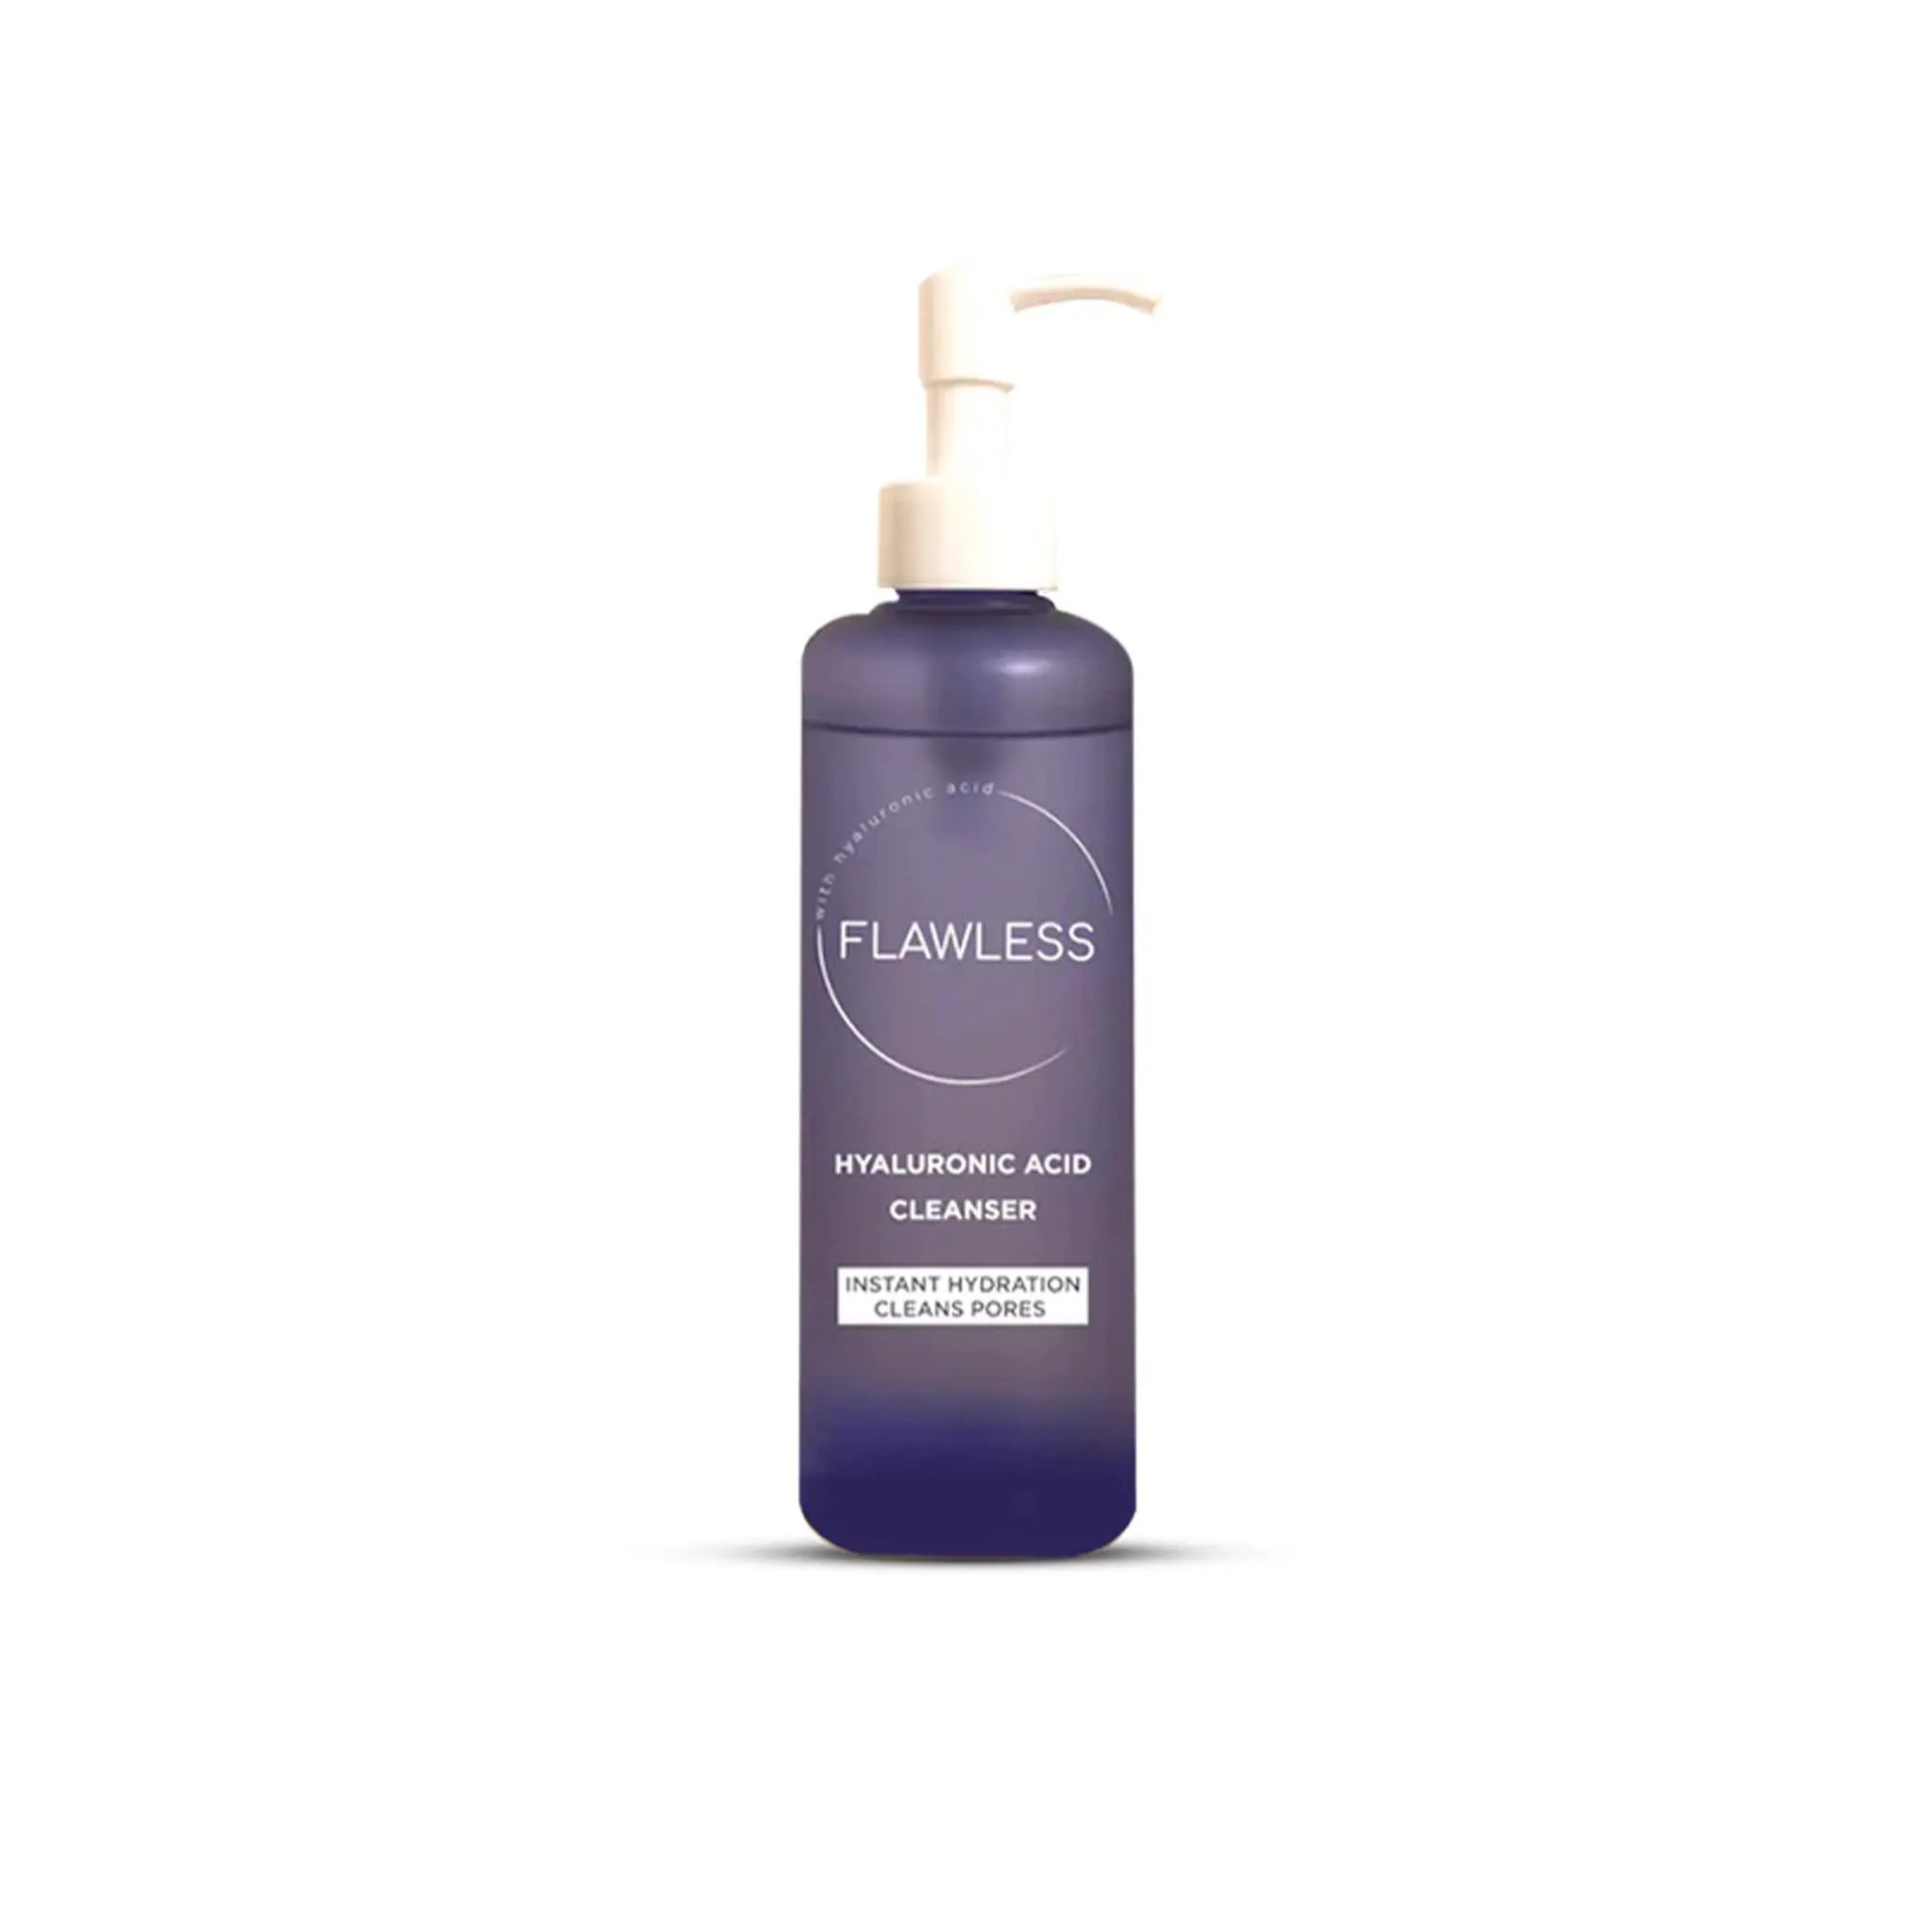 Flawless Hyaluronic acid facial cleanser Flawless